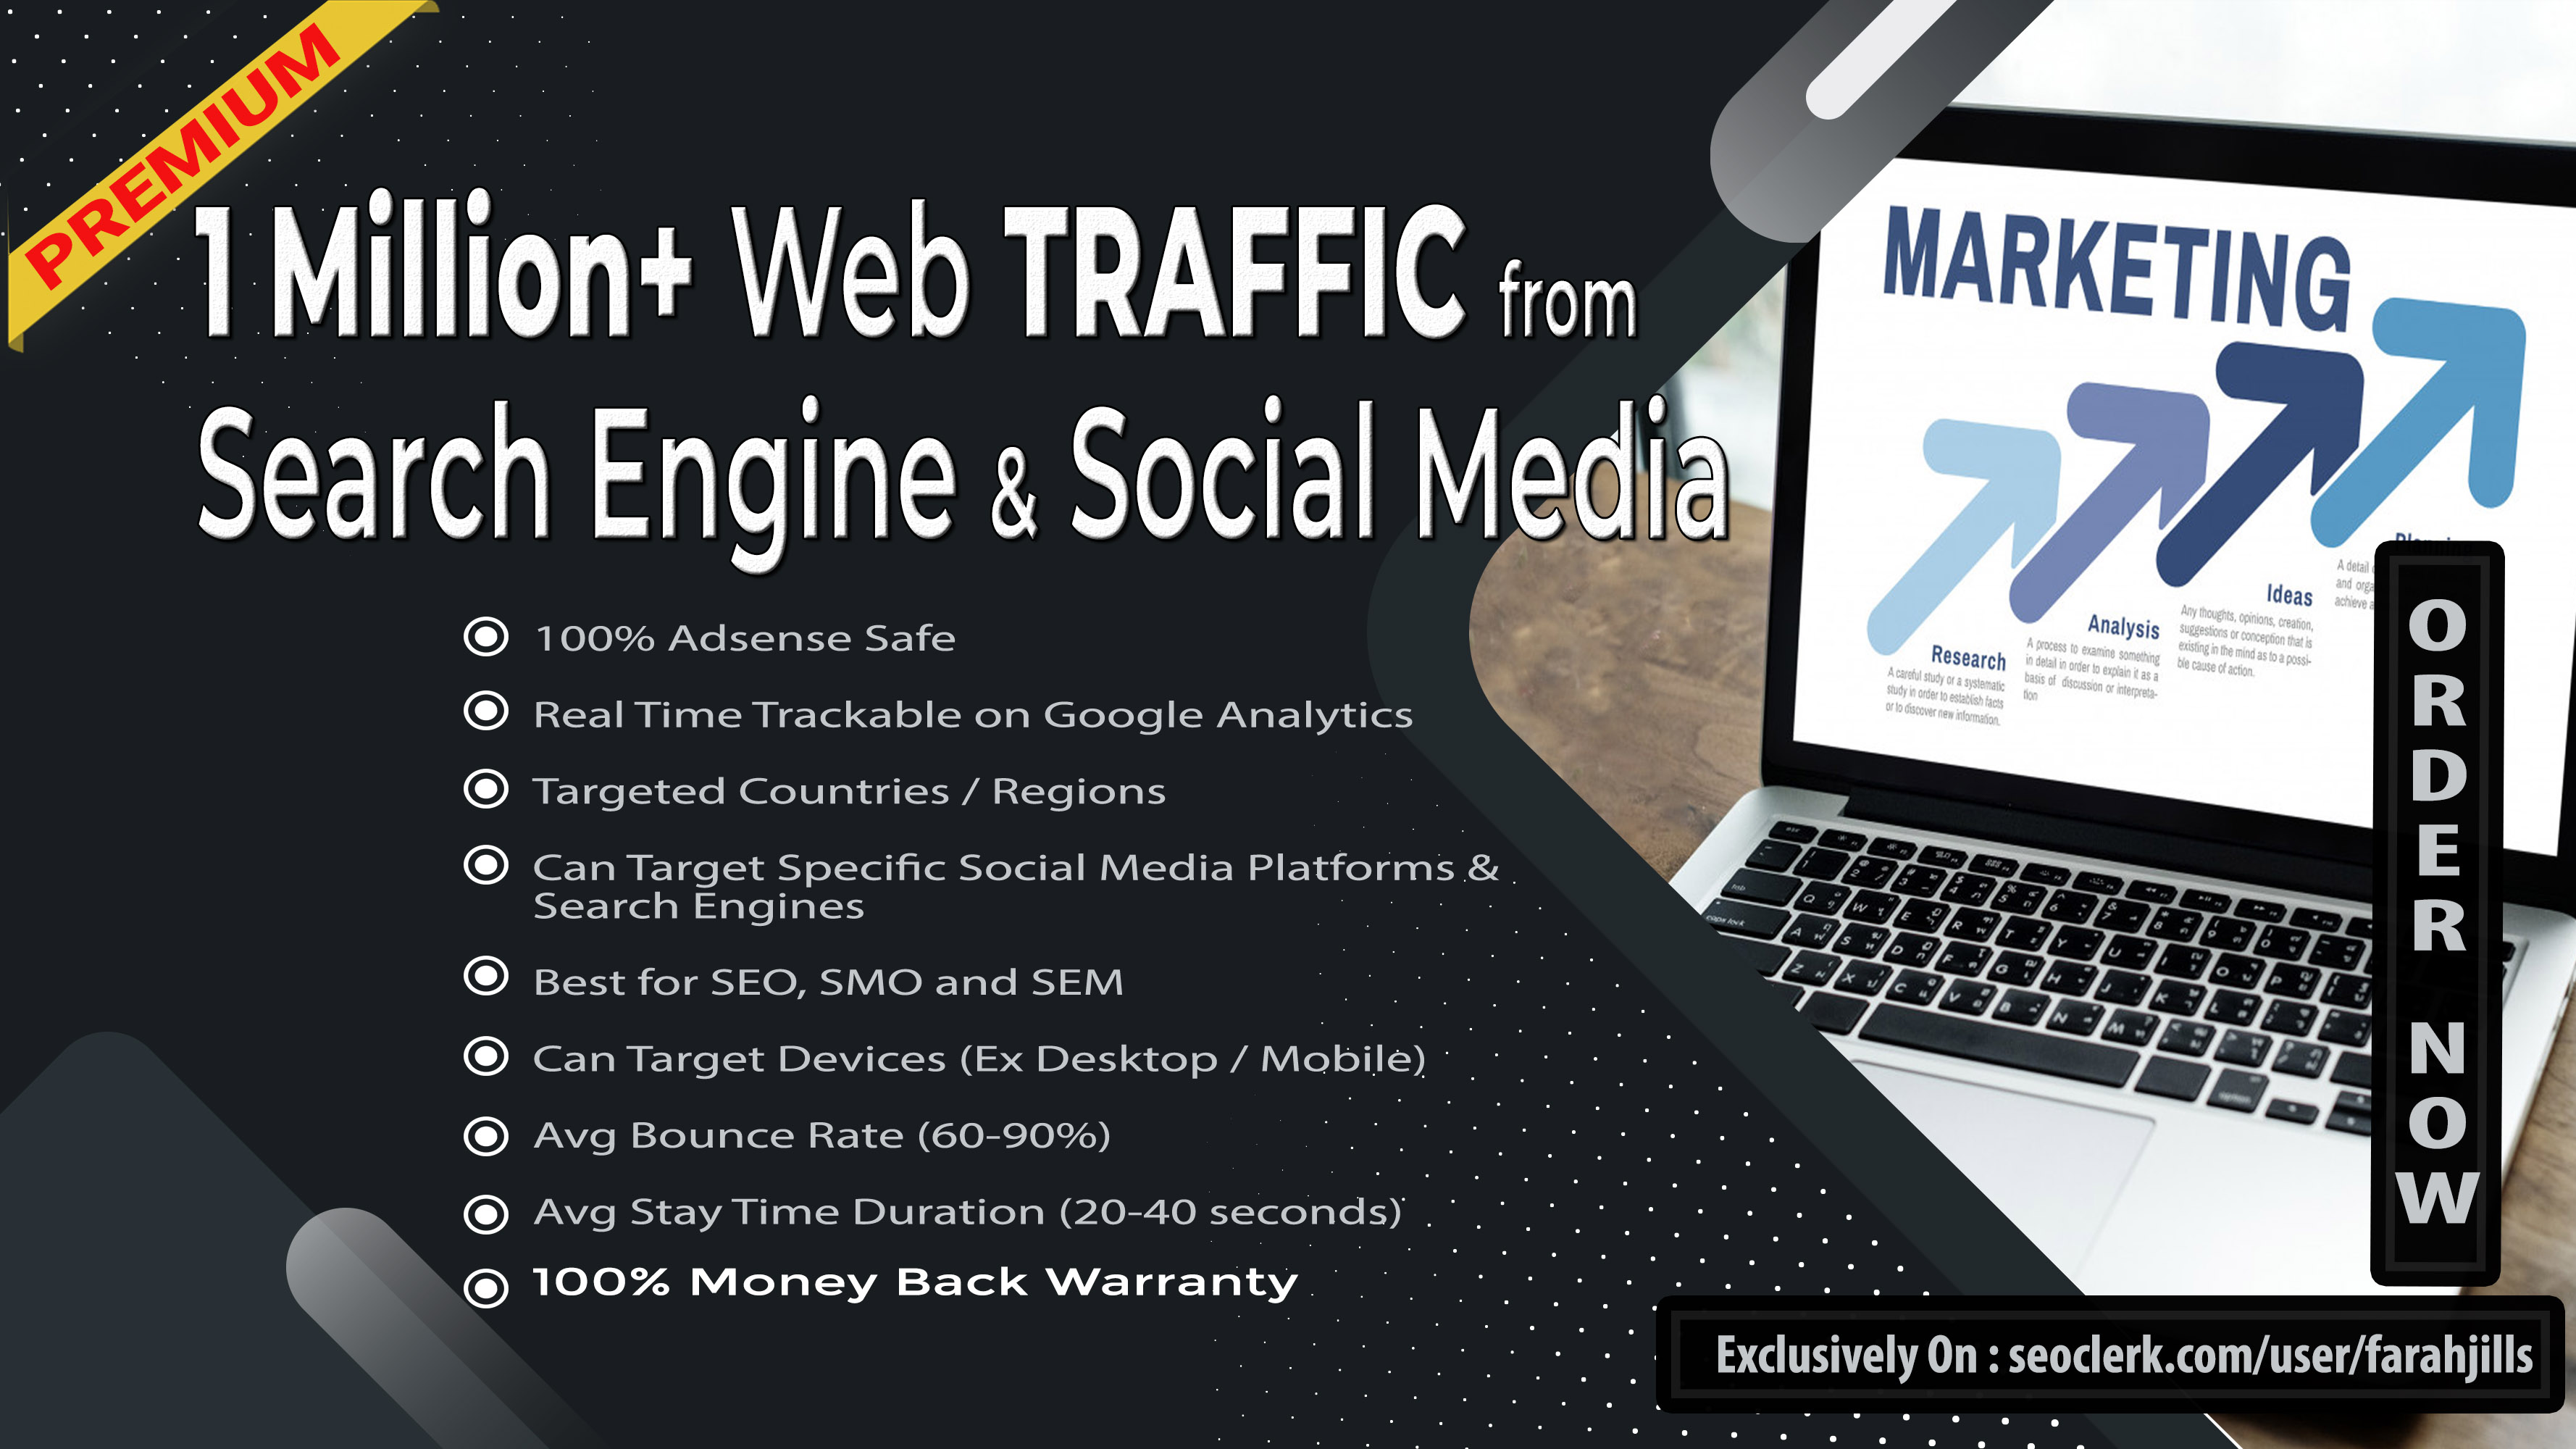 1 MILLION Traffic from Search Engine and Social Media